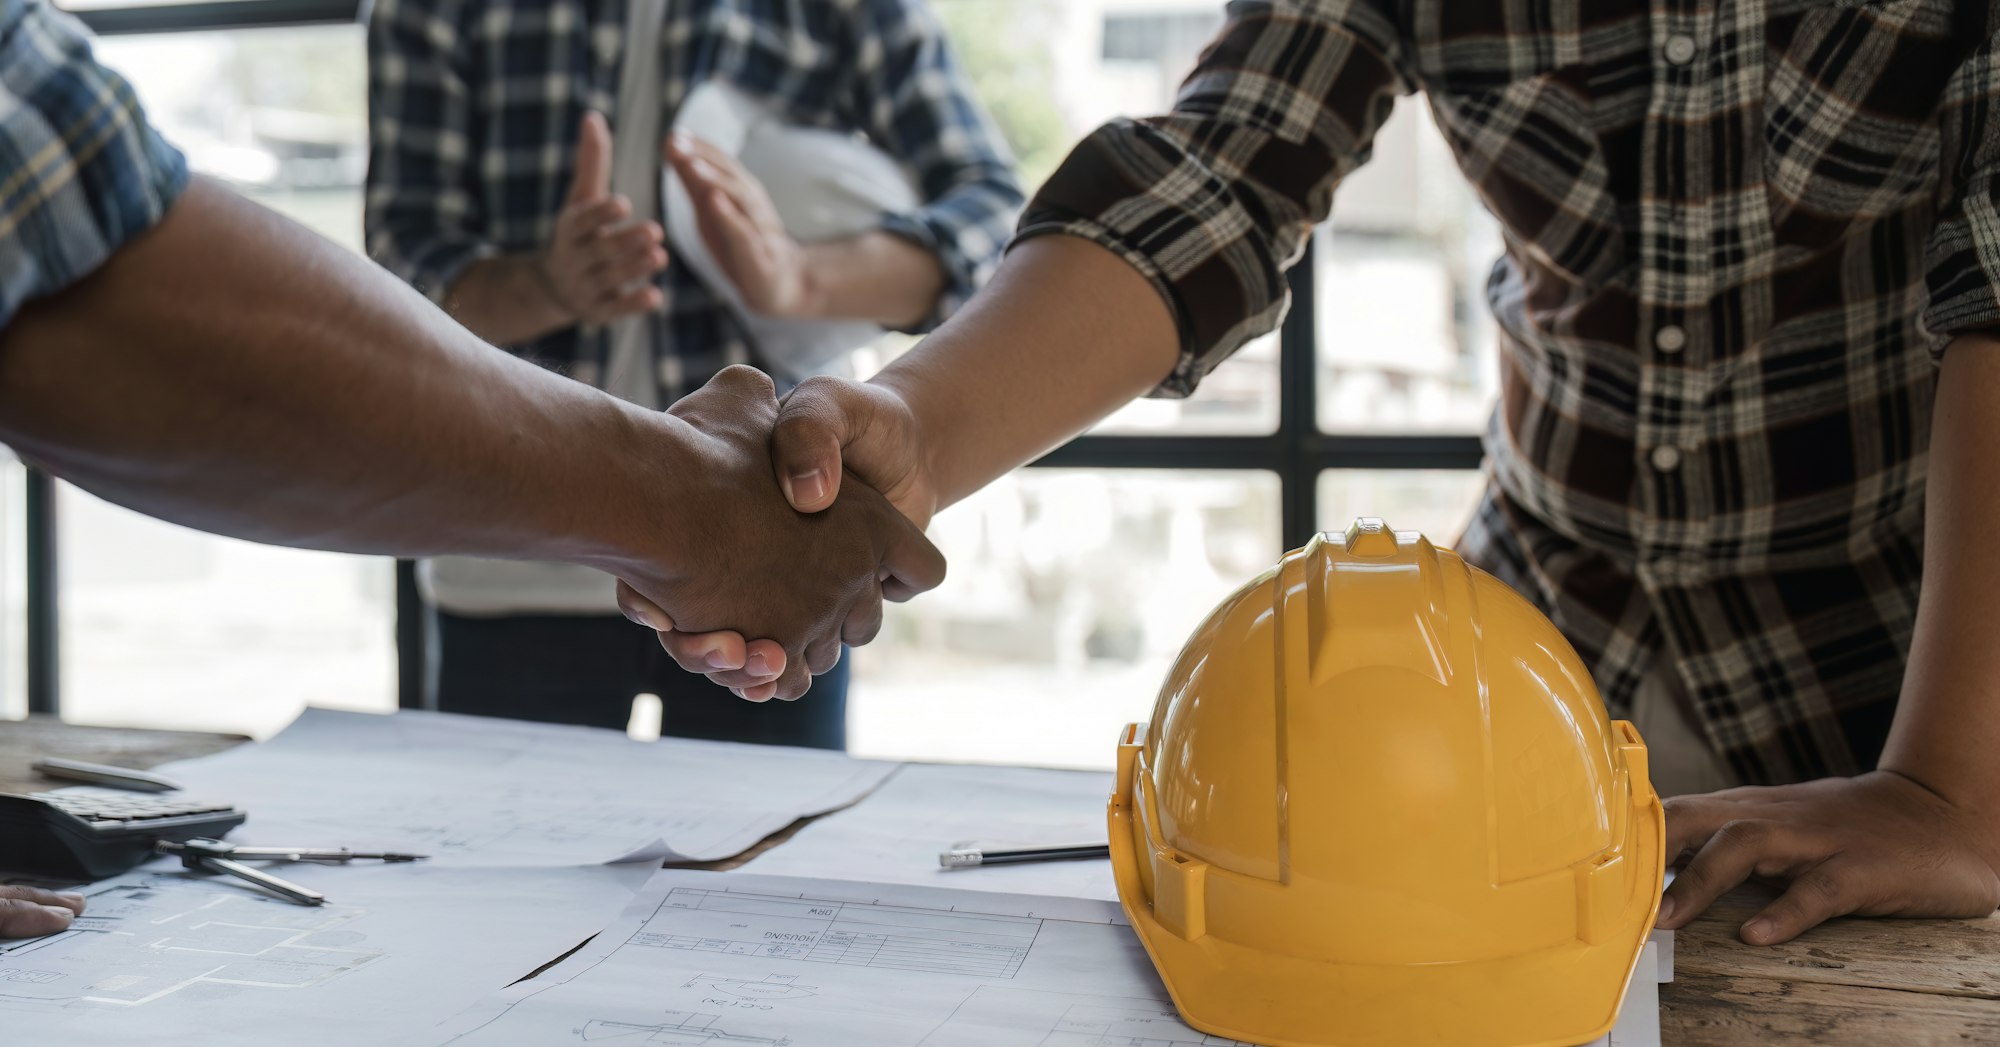 A team of engineers who successfully planned work on a modern home construction project shook hands